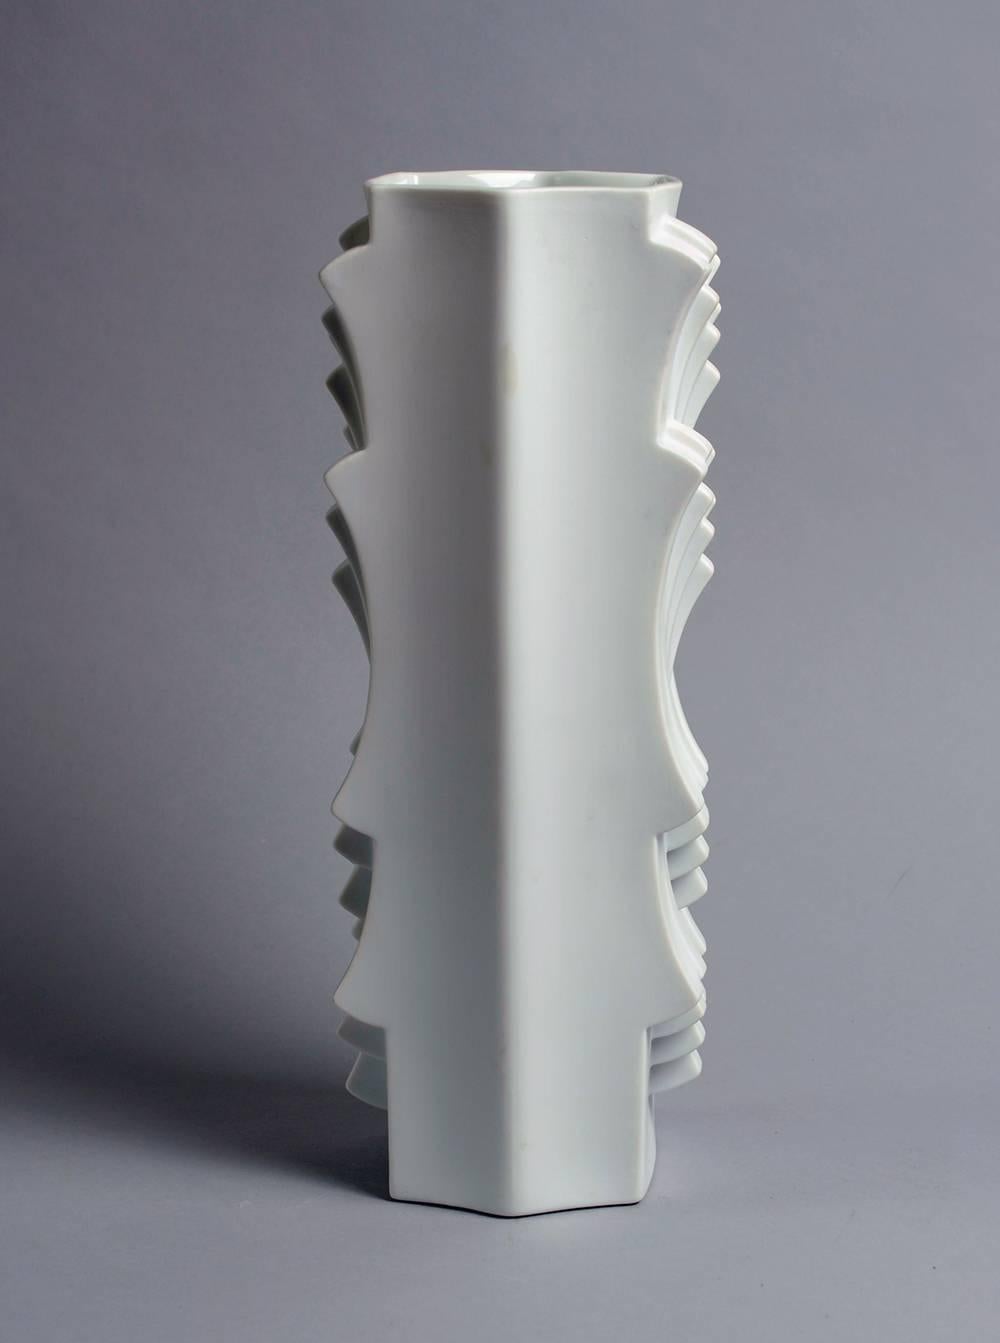 Porcelain Three Op-Art Vases by Lorenz Hutschenreuther, Germany, 1960s For Sale